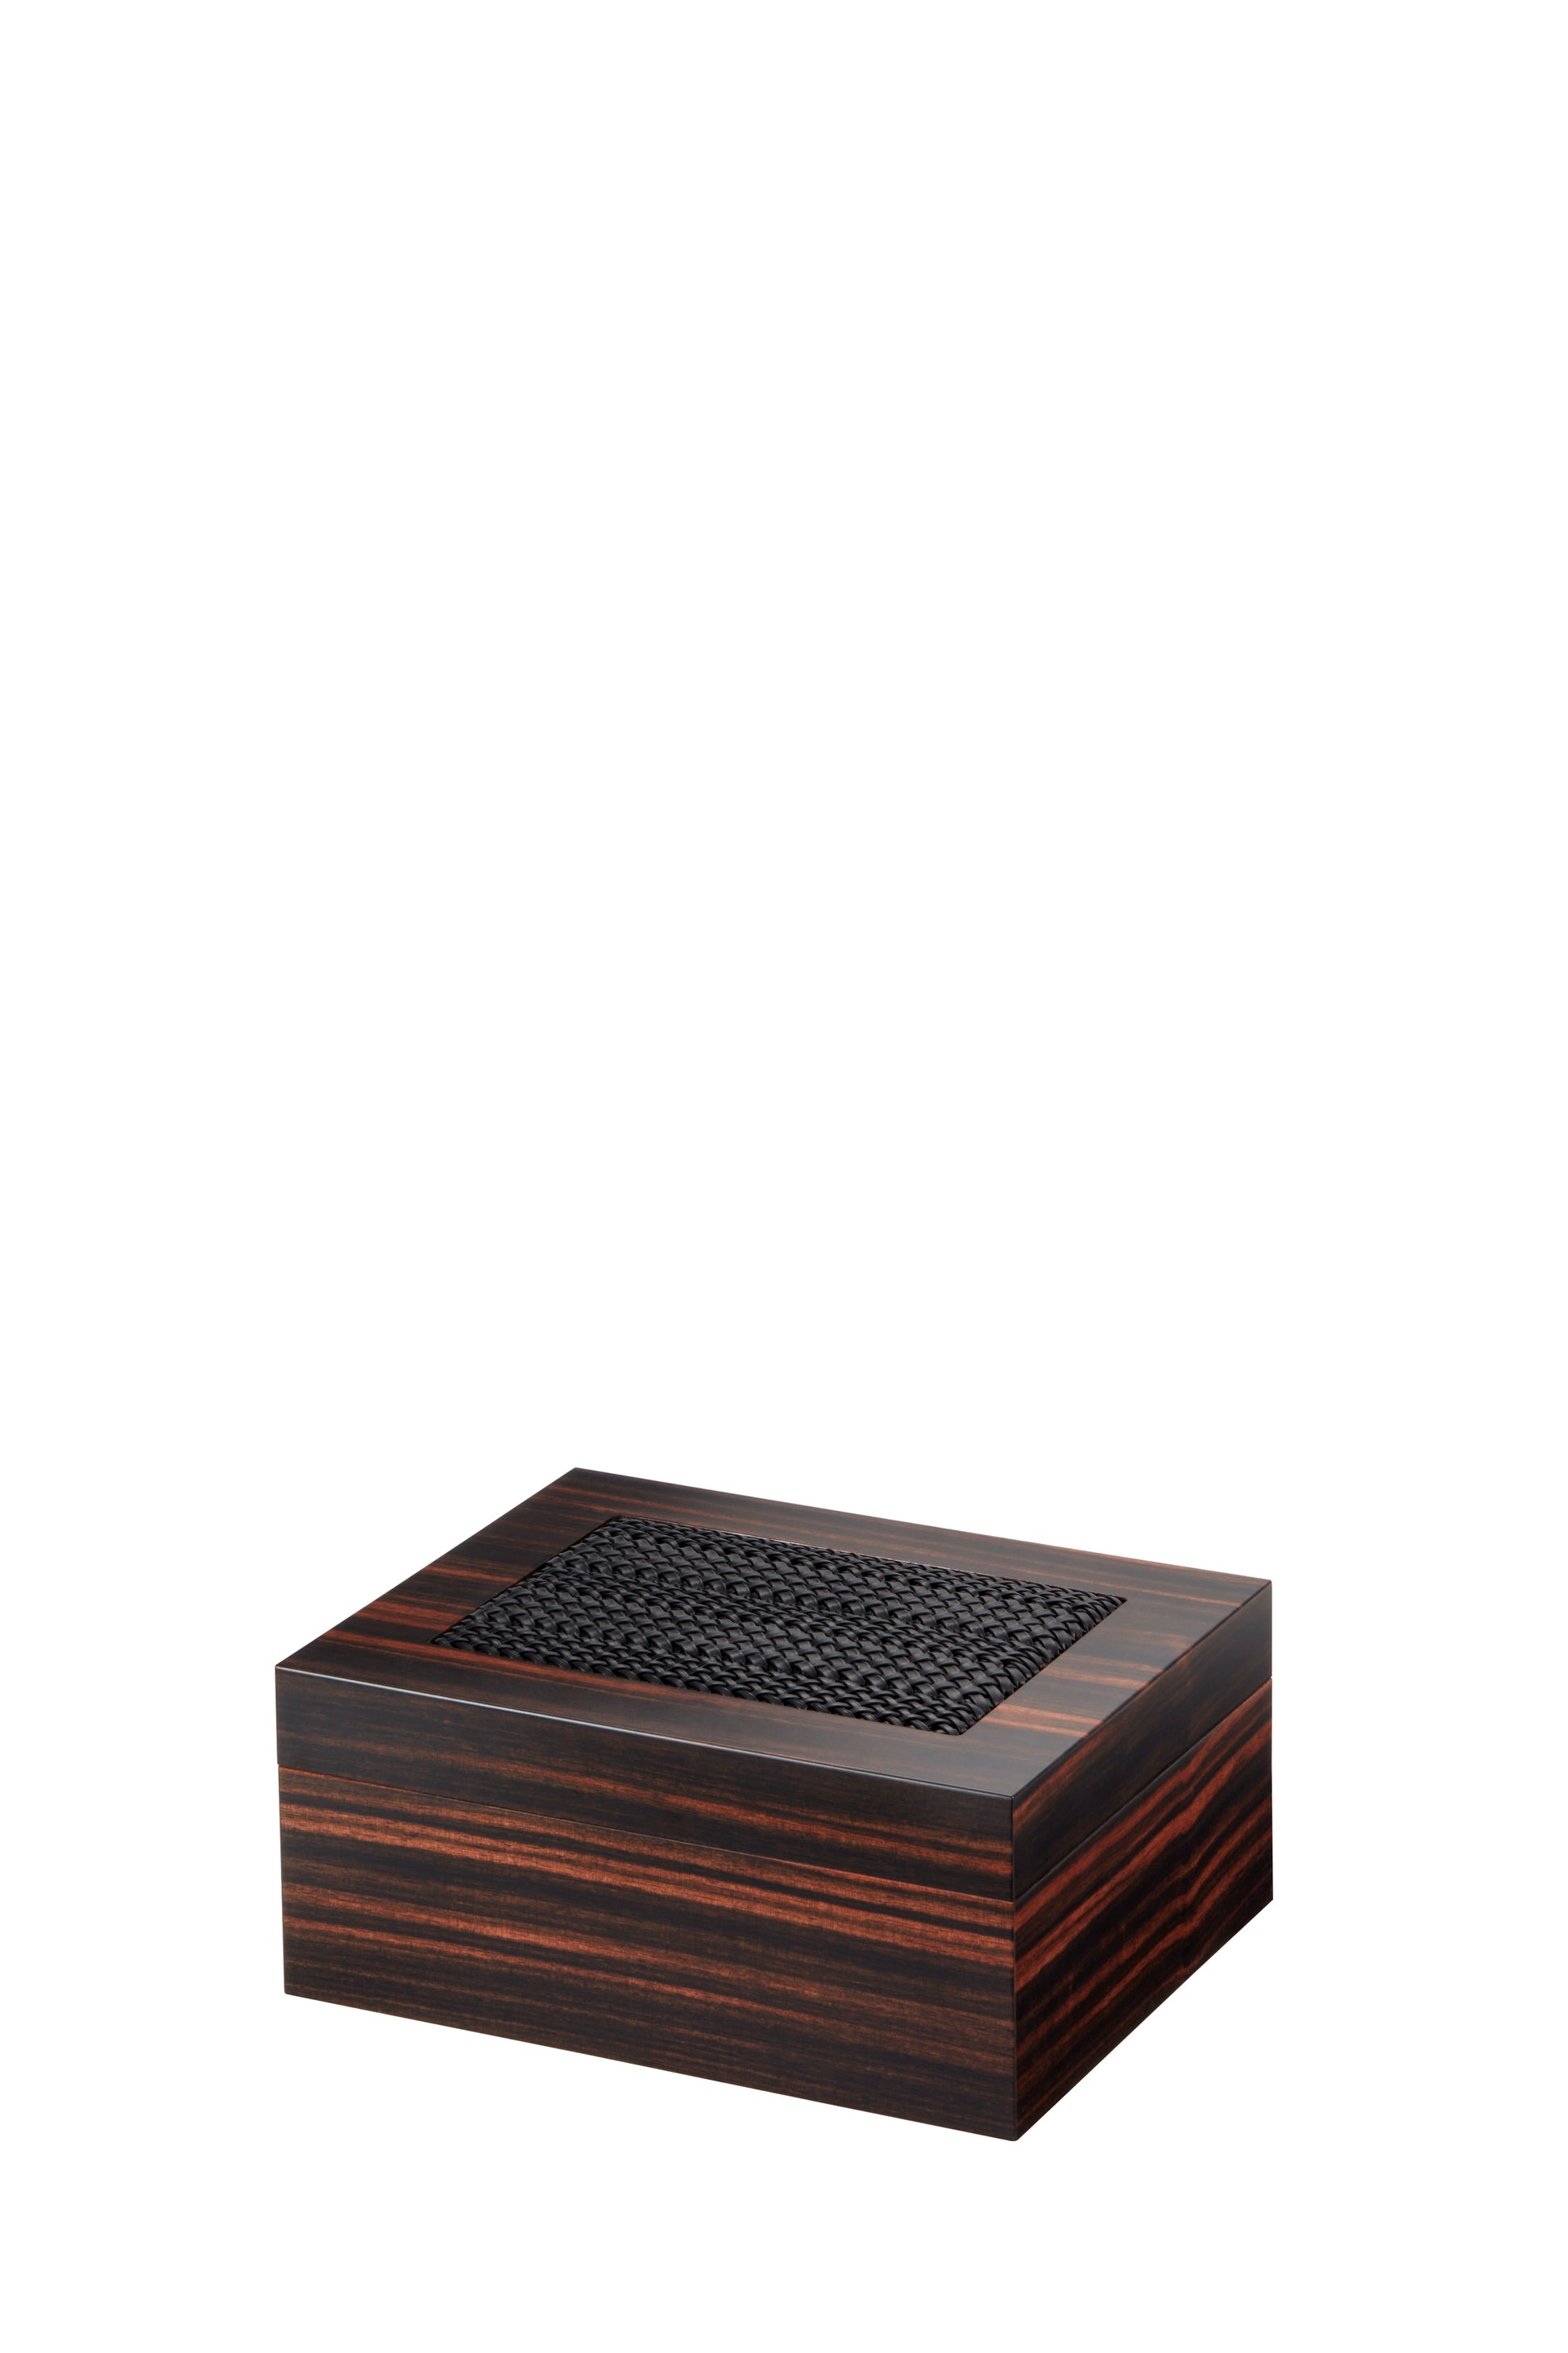 Riviere Rieti Macassar Ebony Cigar Humidor | Elegant Humidor Crafted from Macassar Ebony | Hand-Braided Leather Inlay for Stylish Detailing | Cedar Wood Lining for Optimal Preservation | Explore a Range of Luxury Cigar Accessories at 2Jour Concierge, #1 luxury high-end gift & lifestyle shop